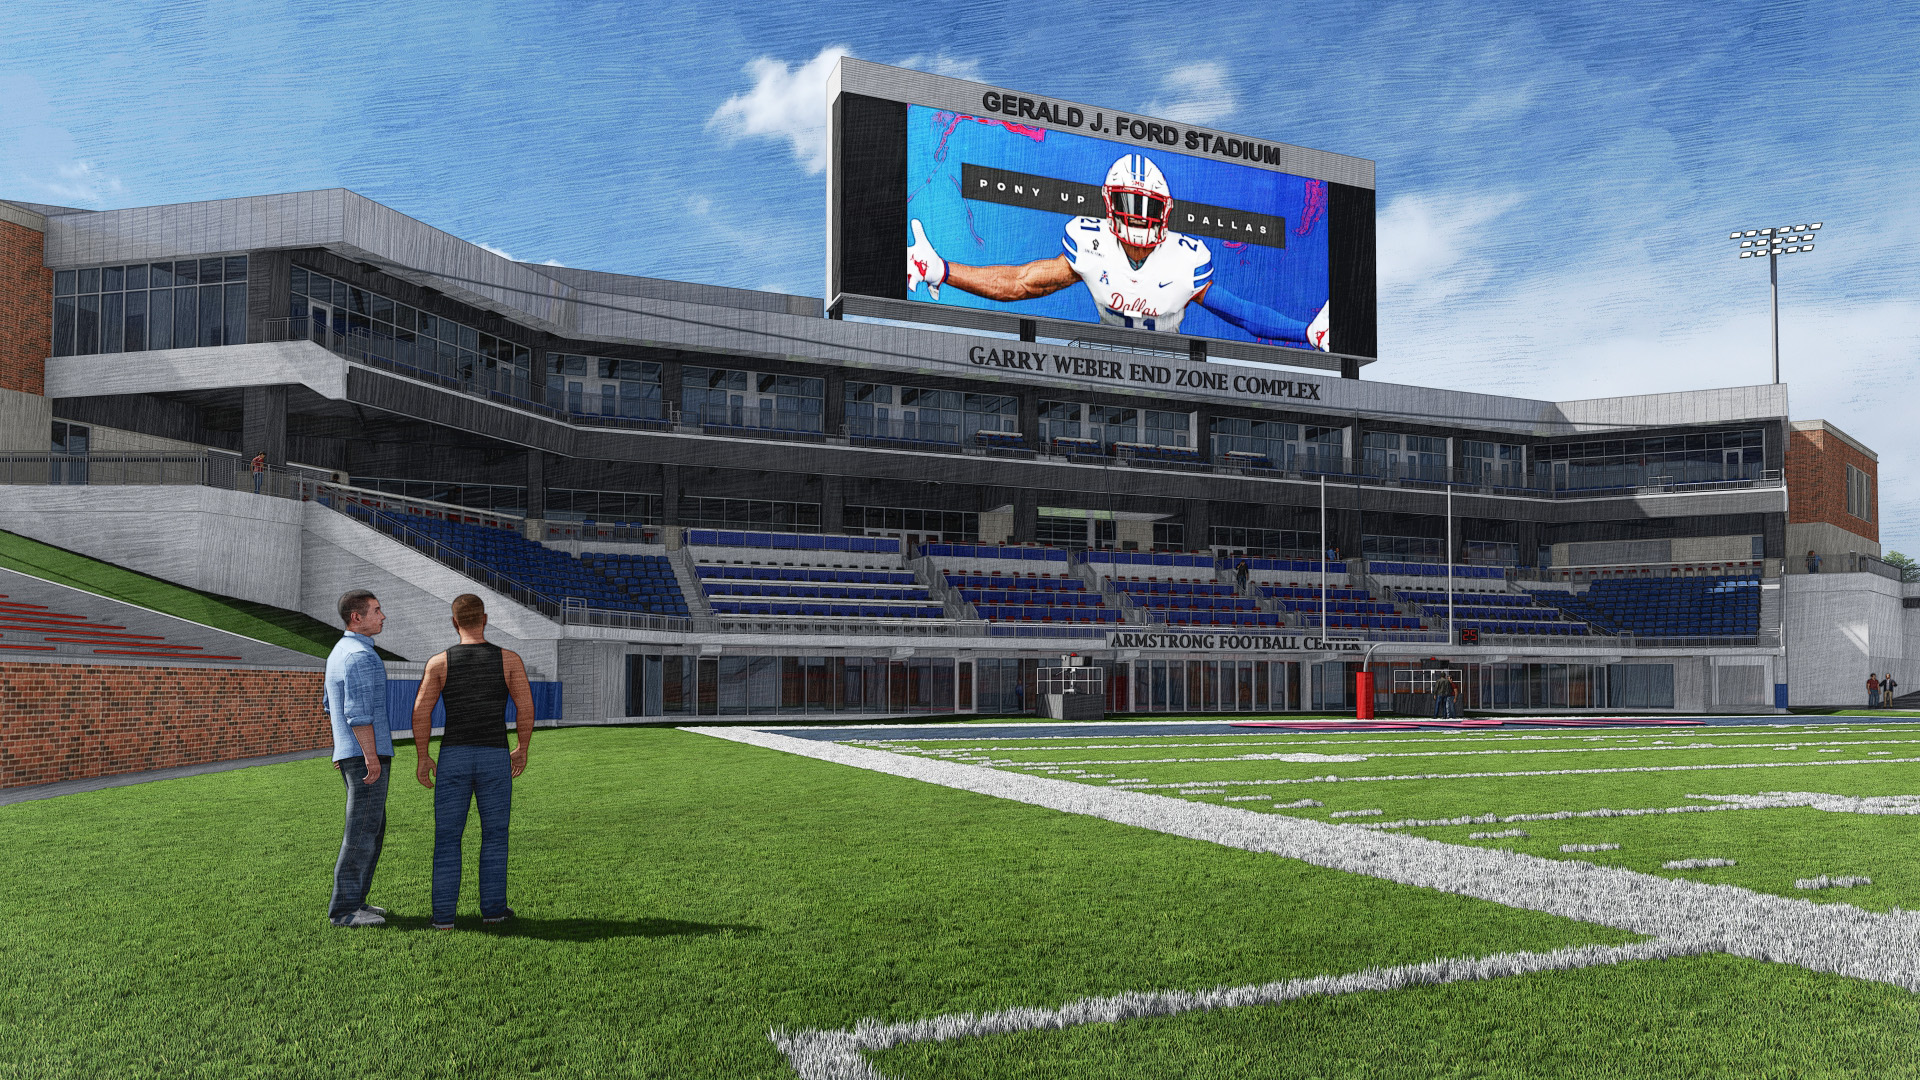 Artist rendering of two people viewing the Garry Weber End Zone Complex from the corner of the football field